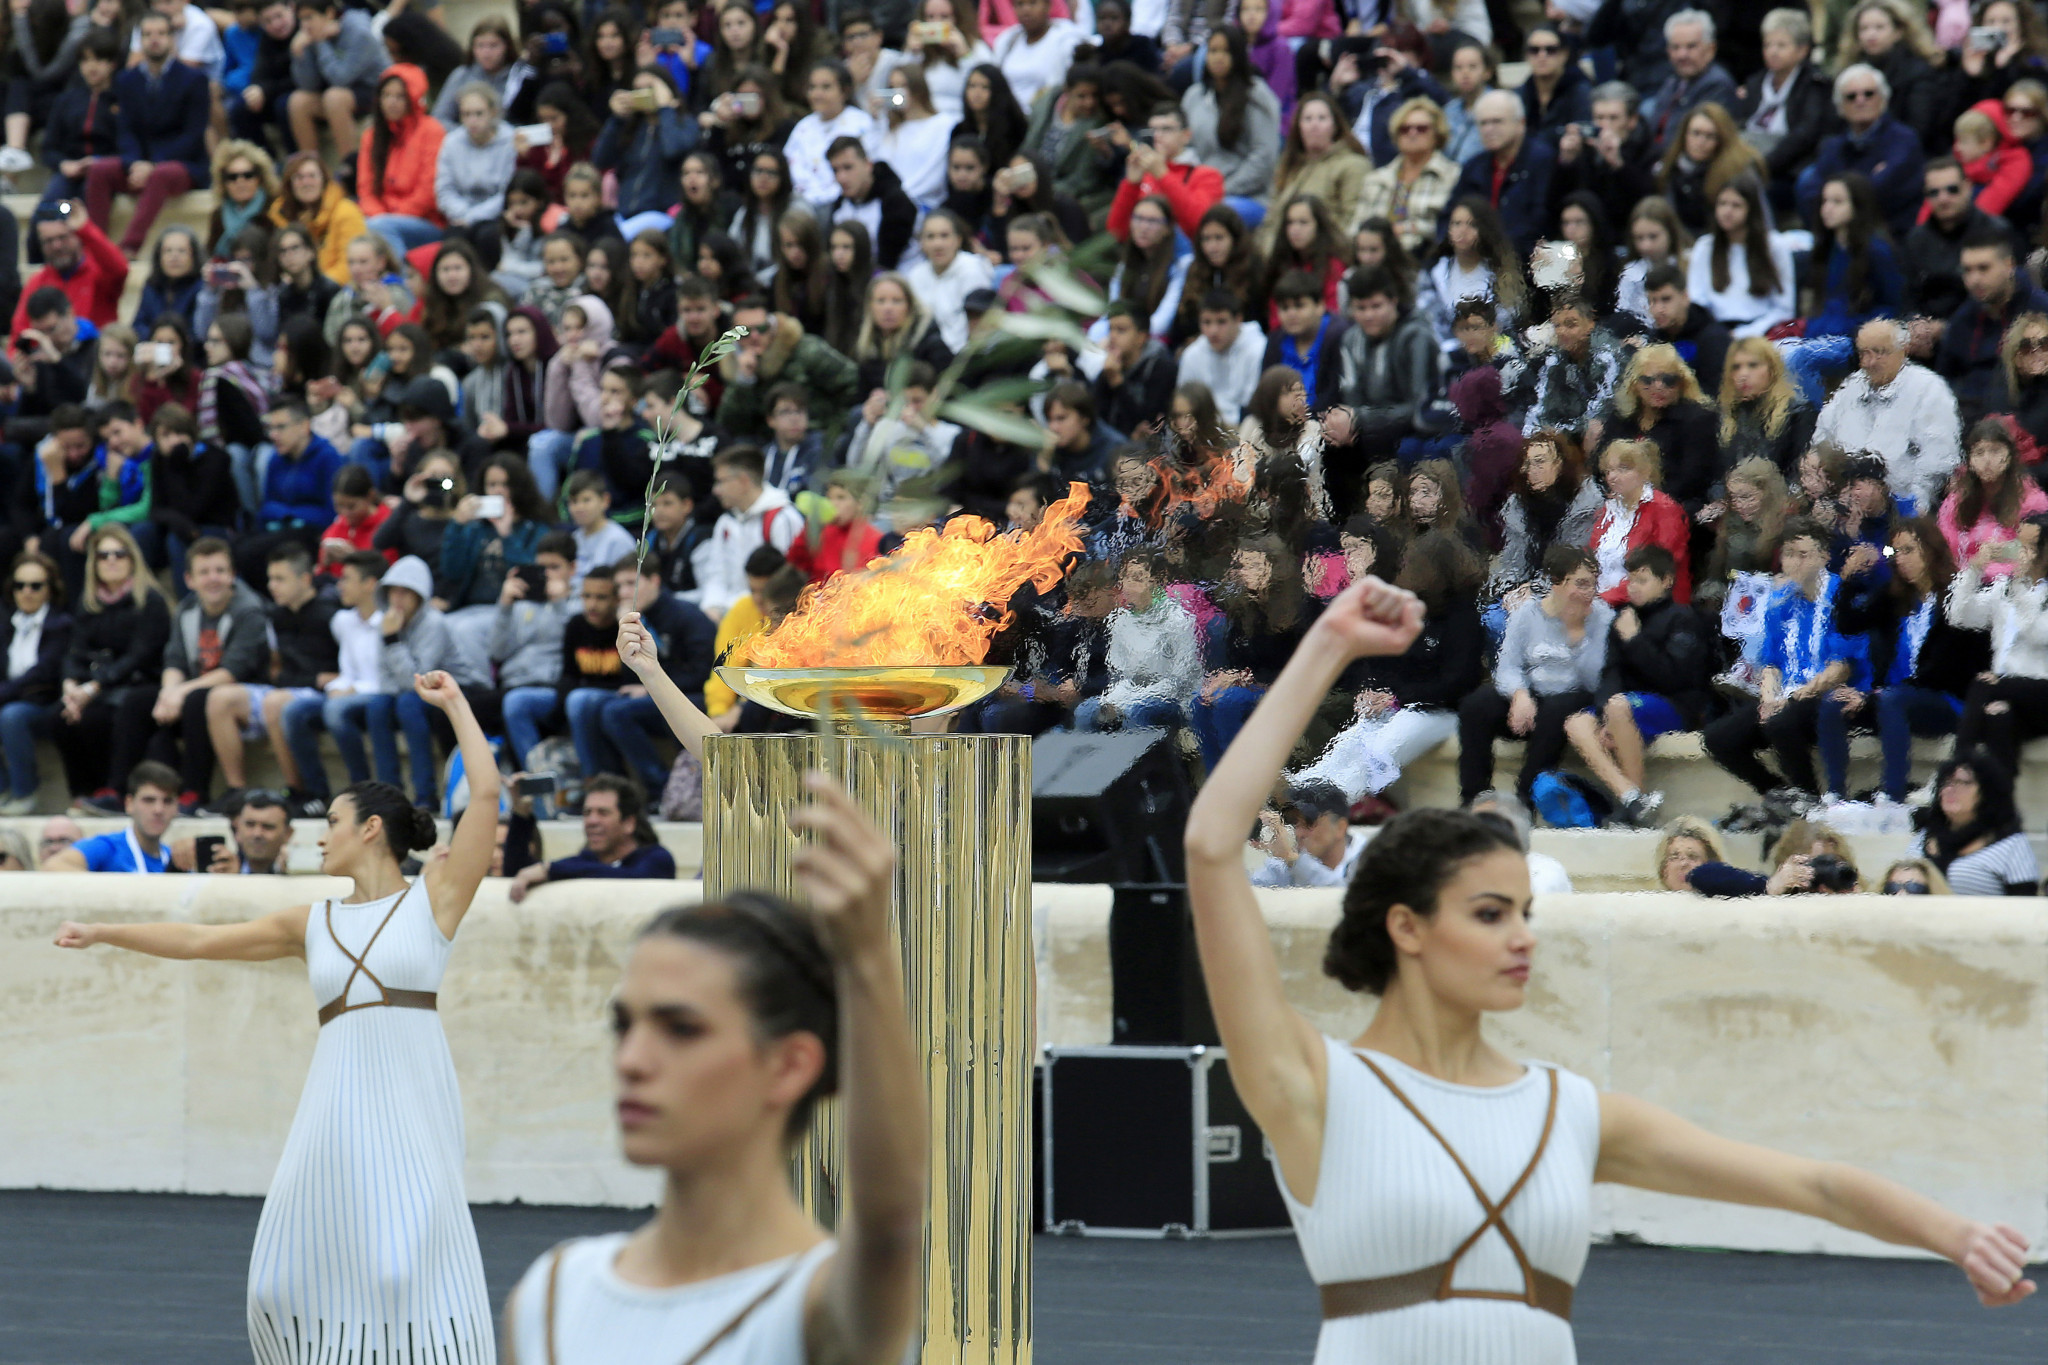 The flame for Buenos Aires 2018 will be lit at the Panathenaic Stadium in Athens ©Getty Images